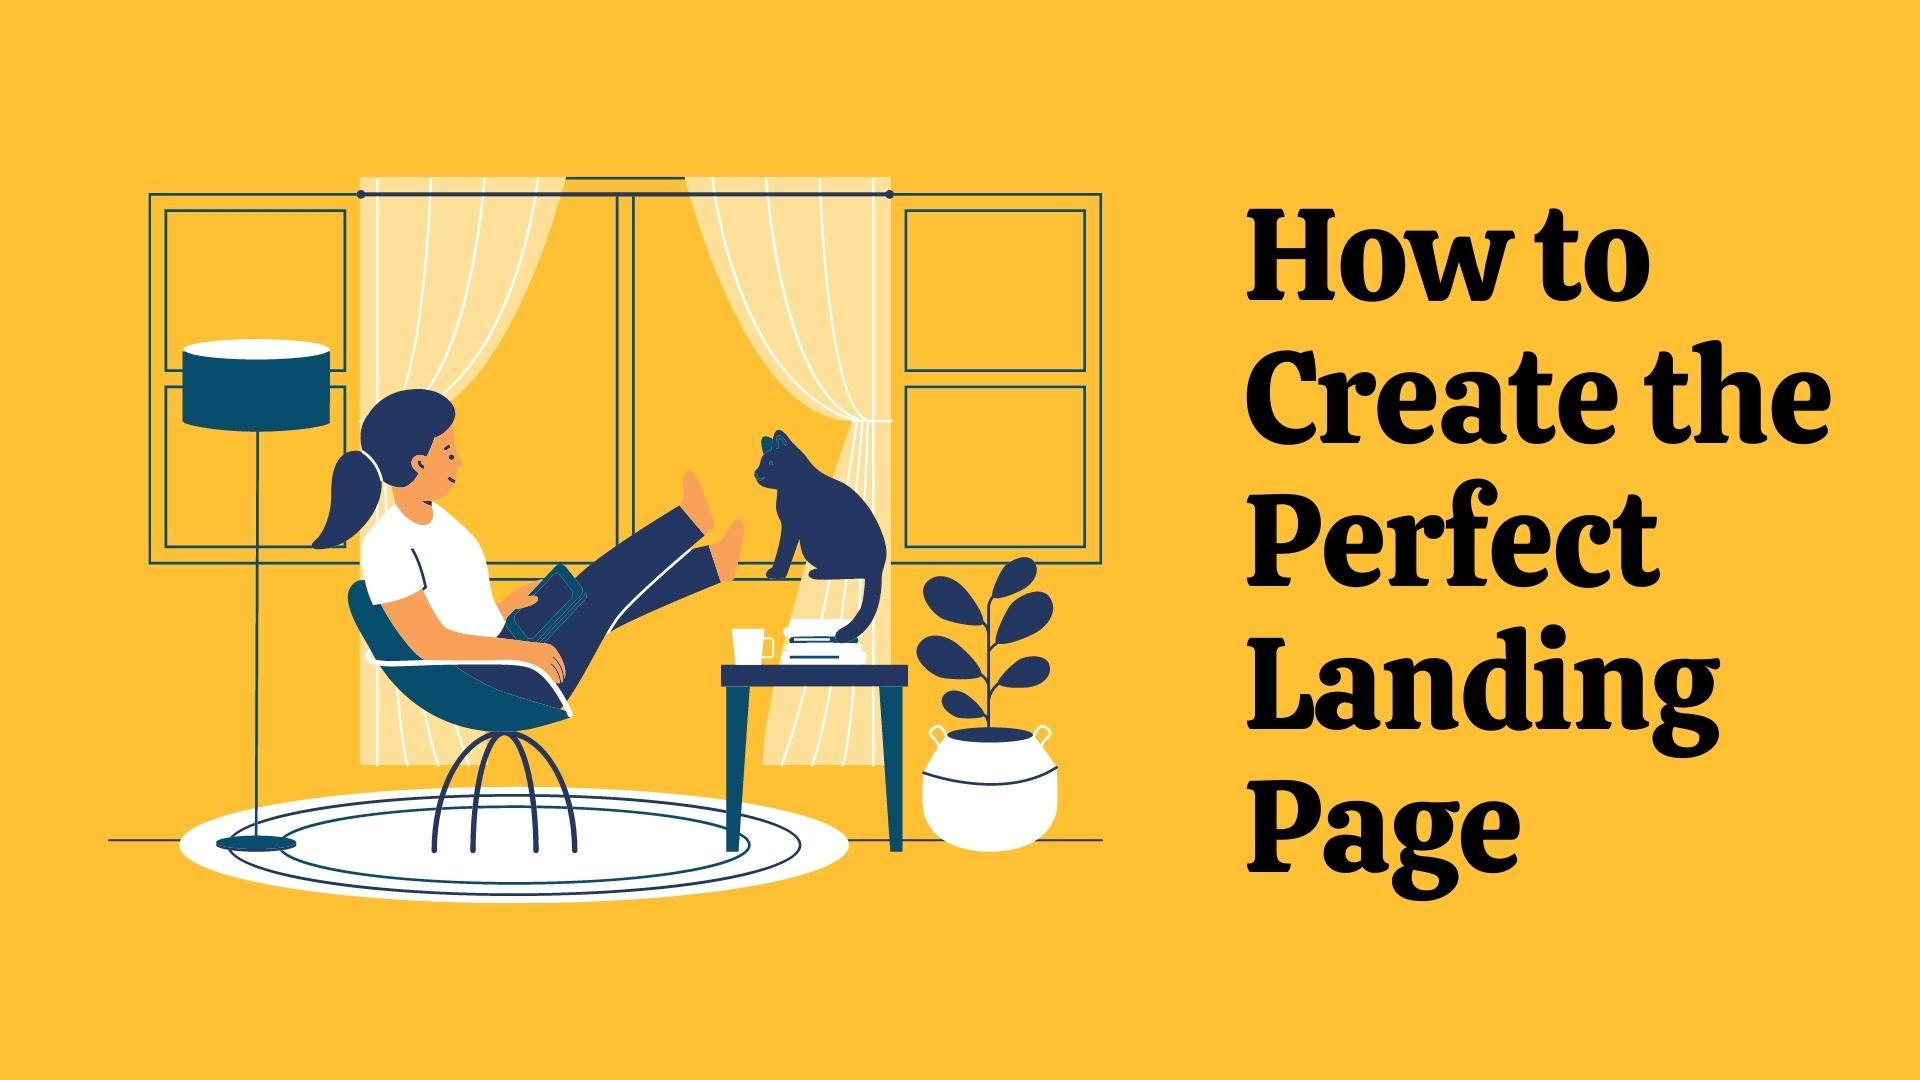 How to Create the Perfect Landing Page